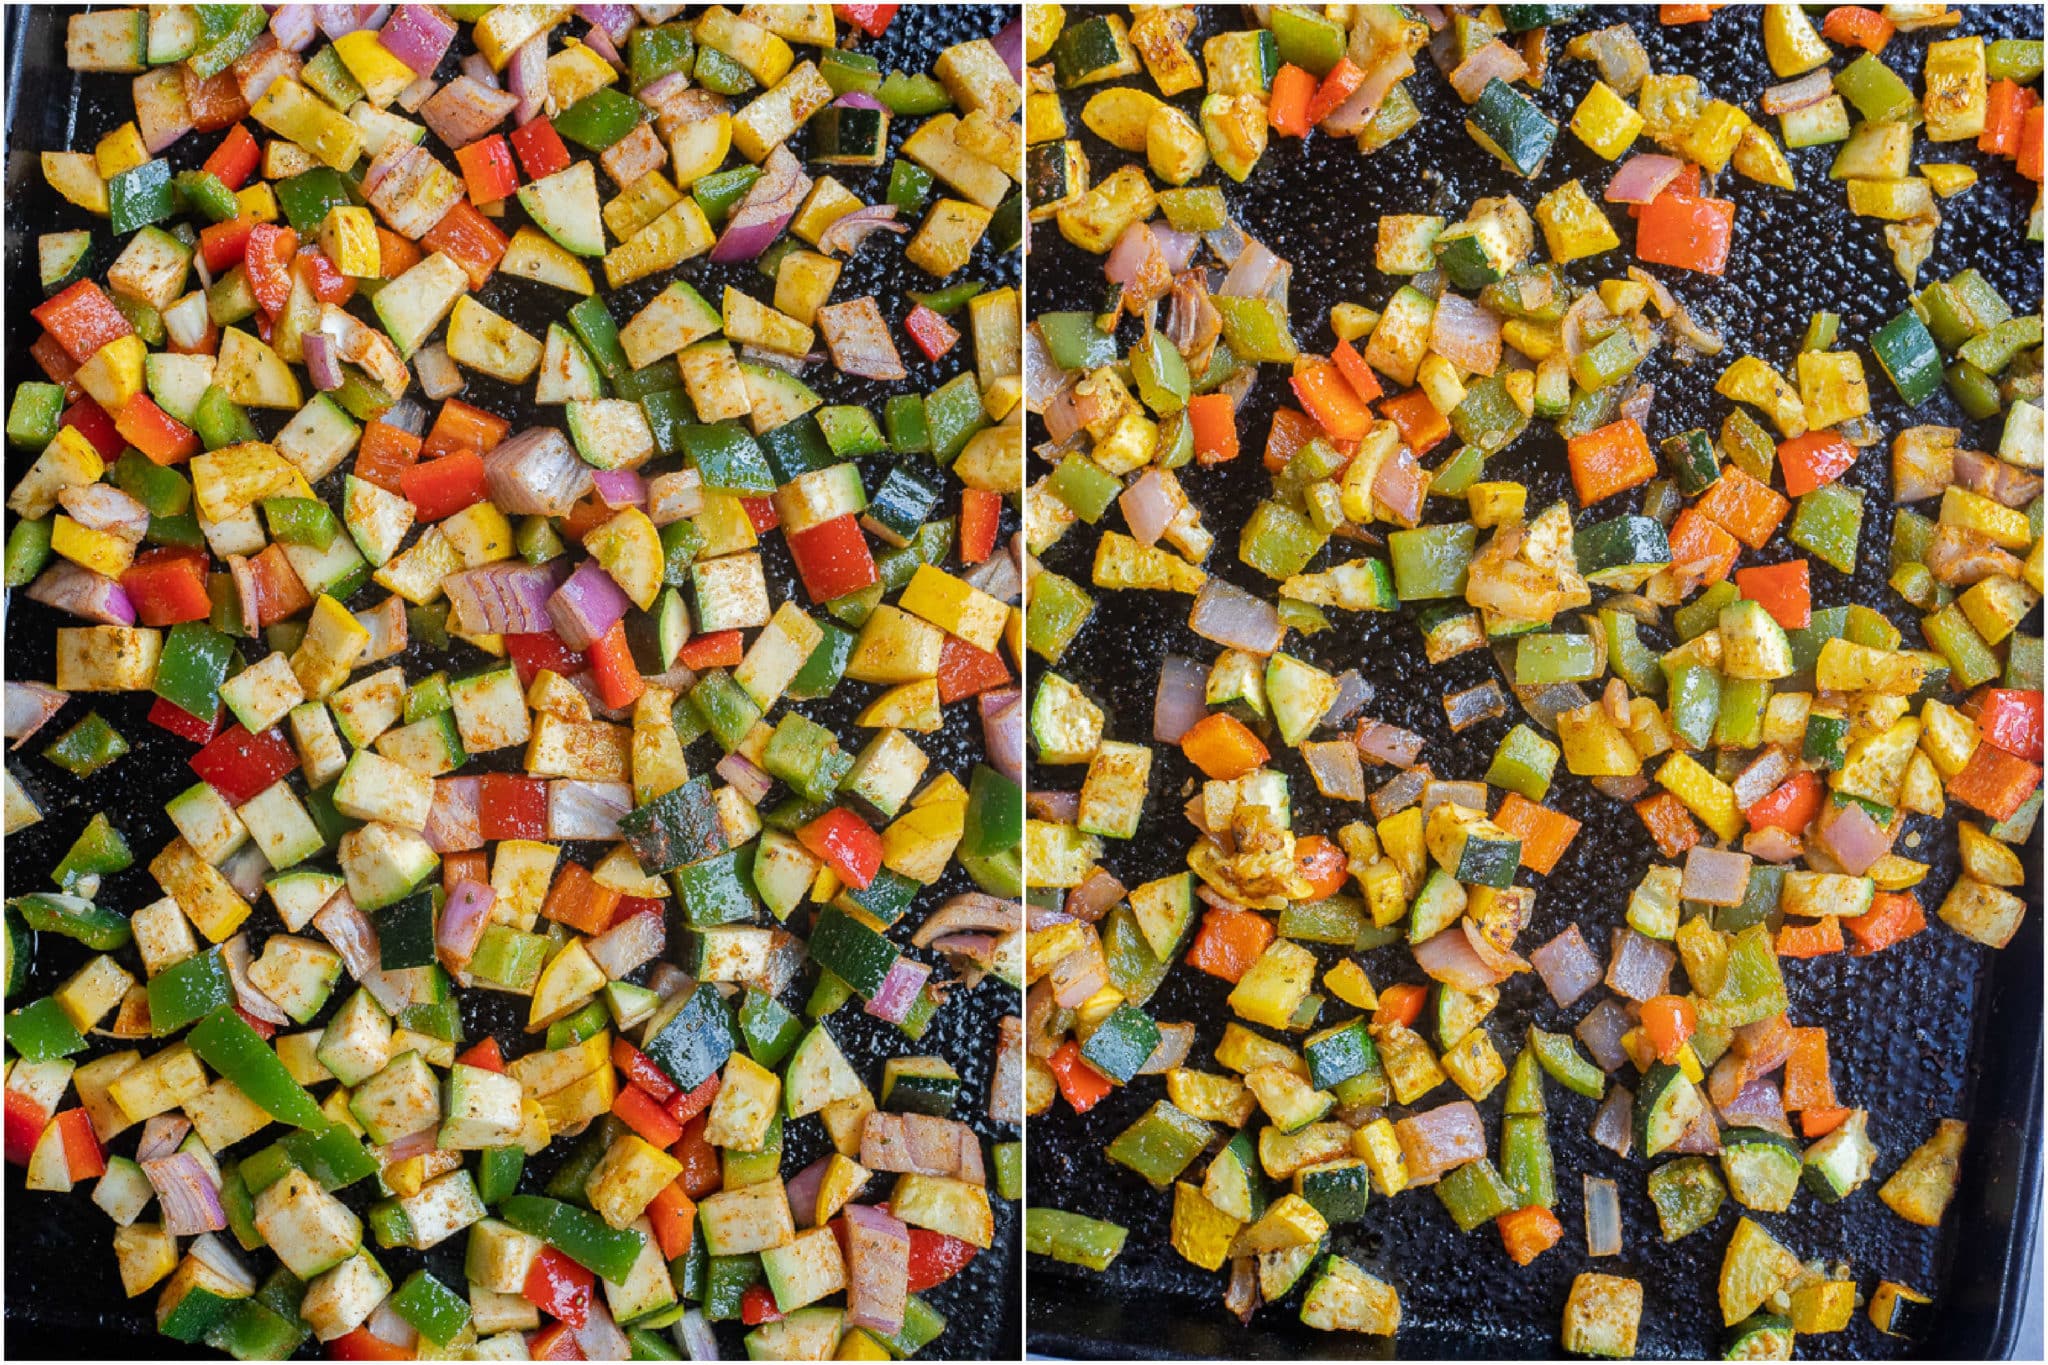 roasted vegetables before and after